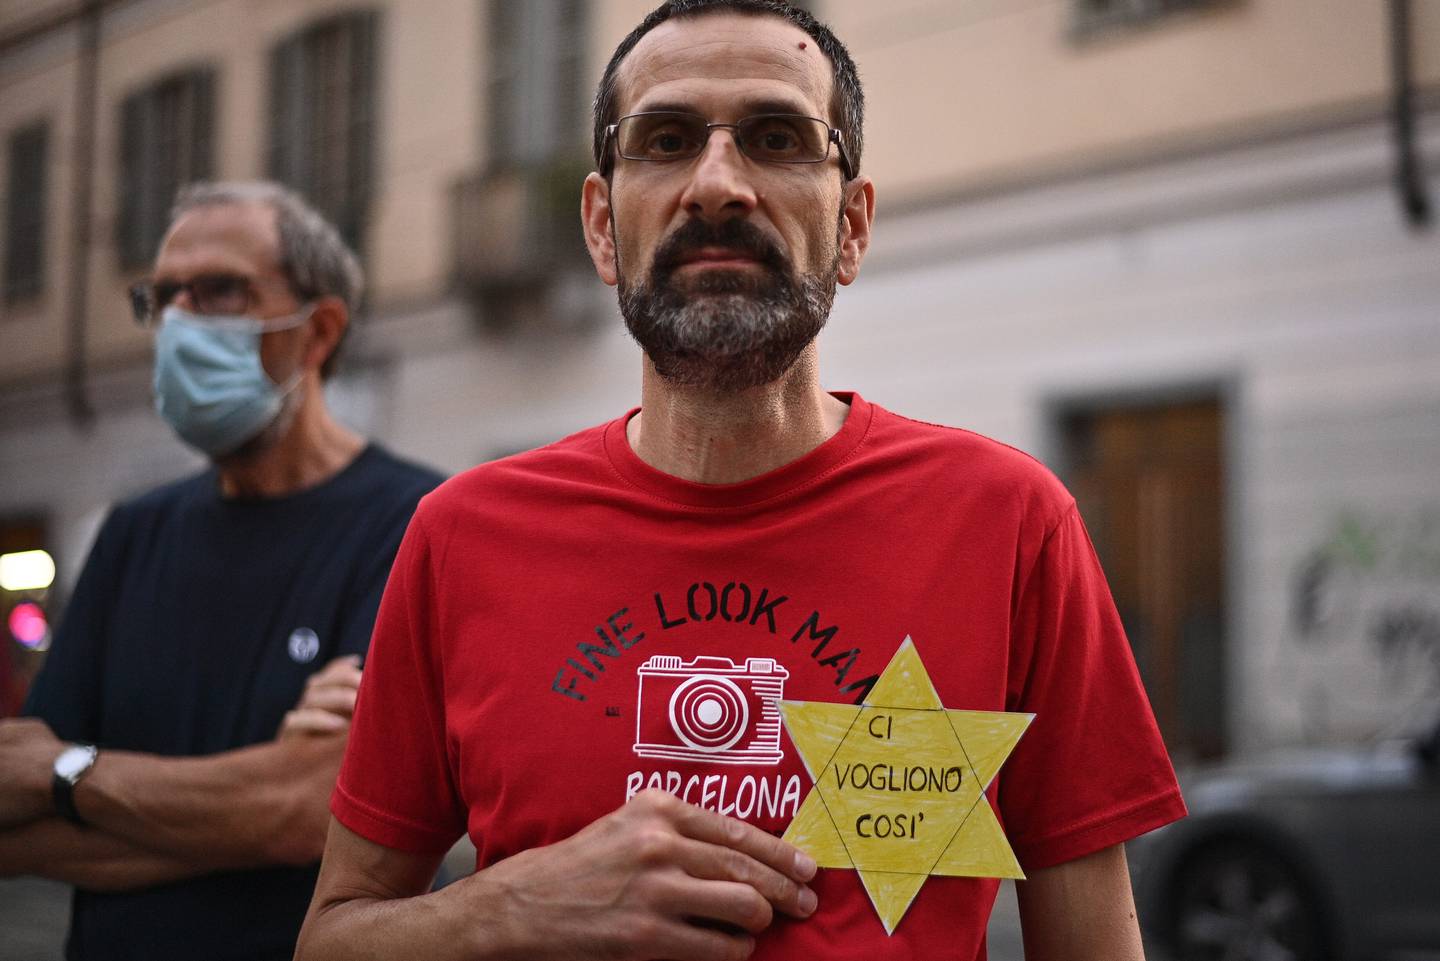 FILE - In this Wednesday, July 28, 2021 file photo, a man shows a sign shaped like a Star of David reading in Italian "They want us like this" during a protest against the COVID-19 vaccination pass in Turin, Italy. Shouts of “liberty” have echoed through Italian and French streets and squares as thousands show their opposition to plans to require vaccination cards to continue normal social activities, like dining indoors at restaurants, visiting museums or cheering home teams in stadiums. (Marco Alpozzi/LaPresse via AP, File)